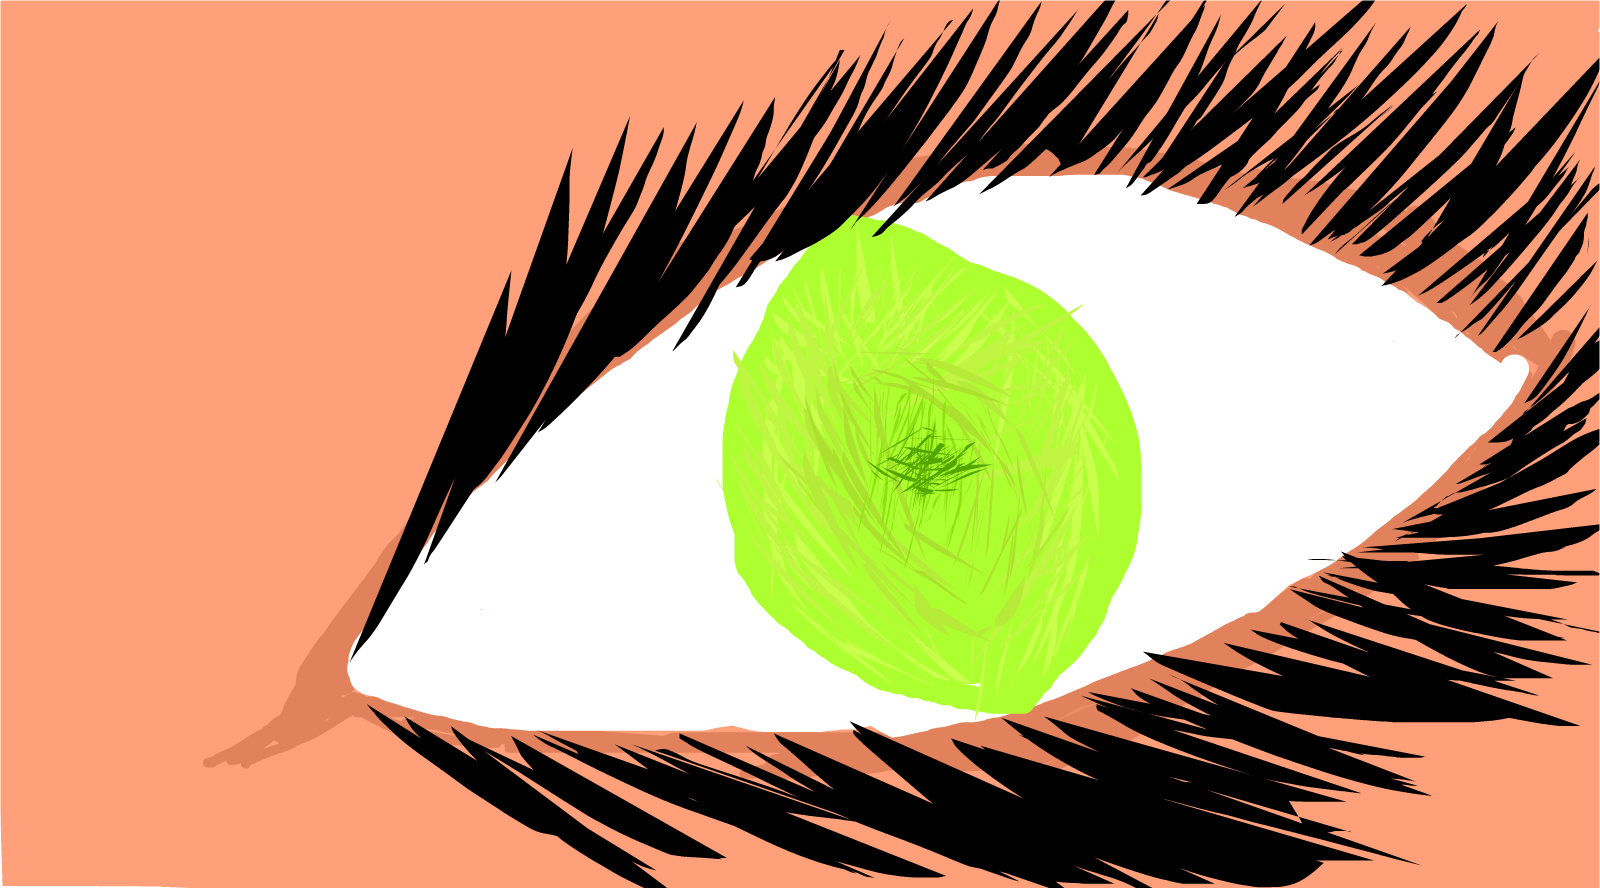 another attempt at drawing an eye